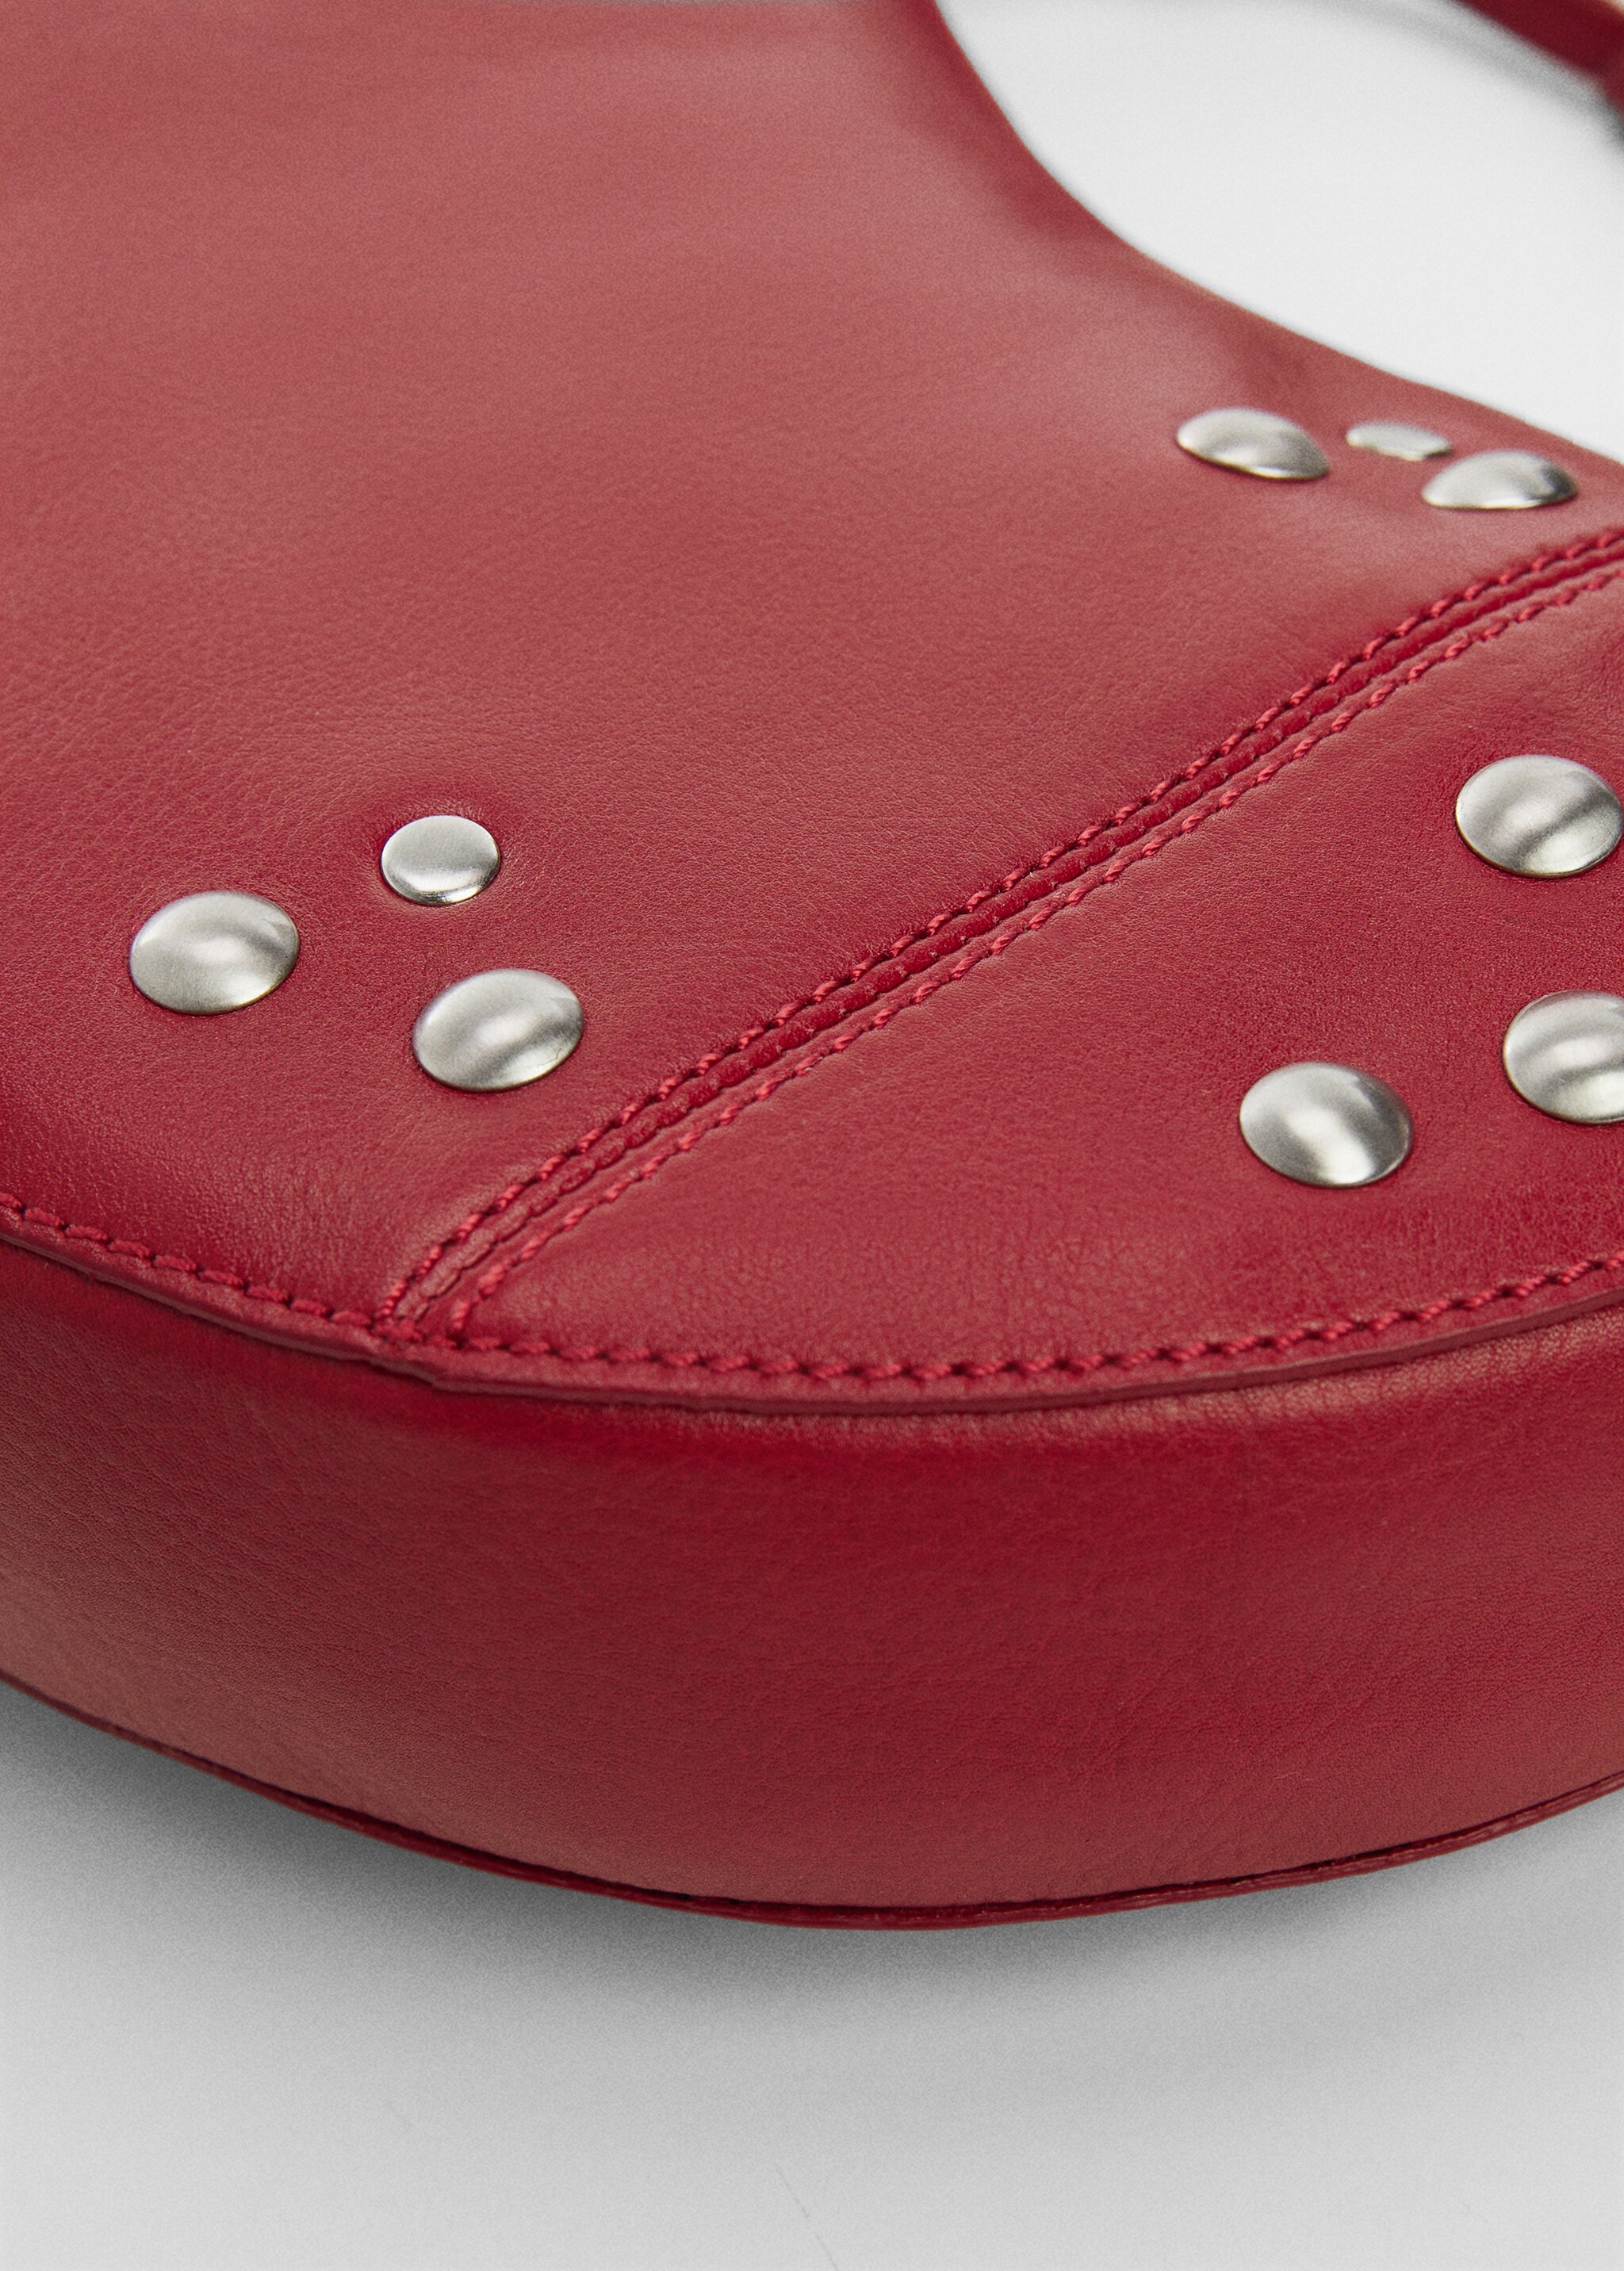 Stud leather bag - Details of the article 2